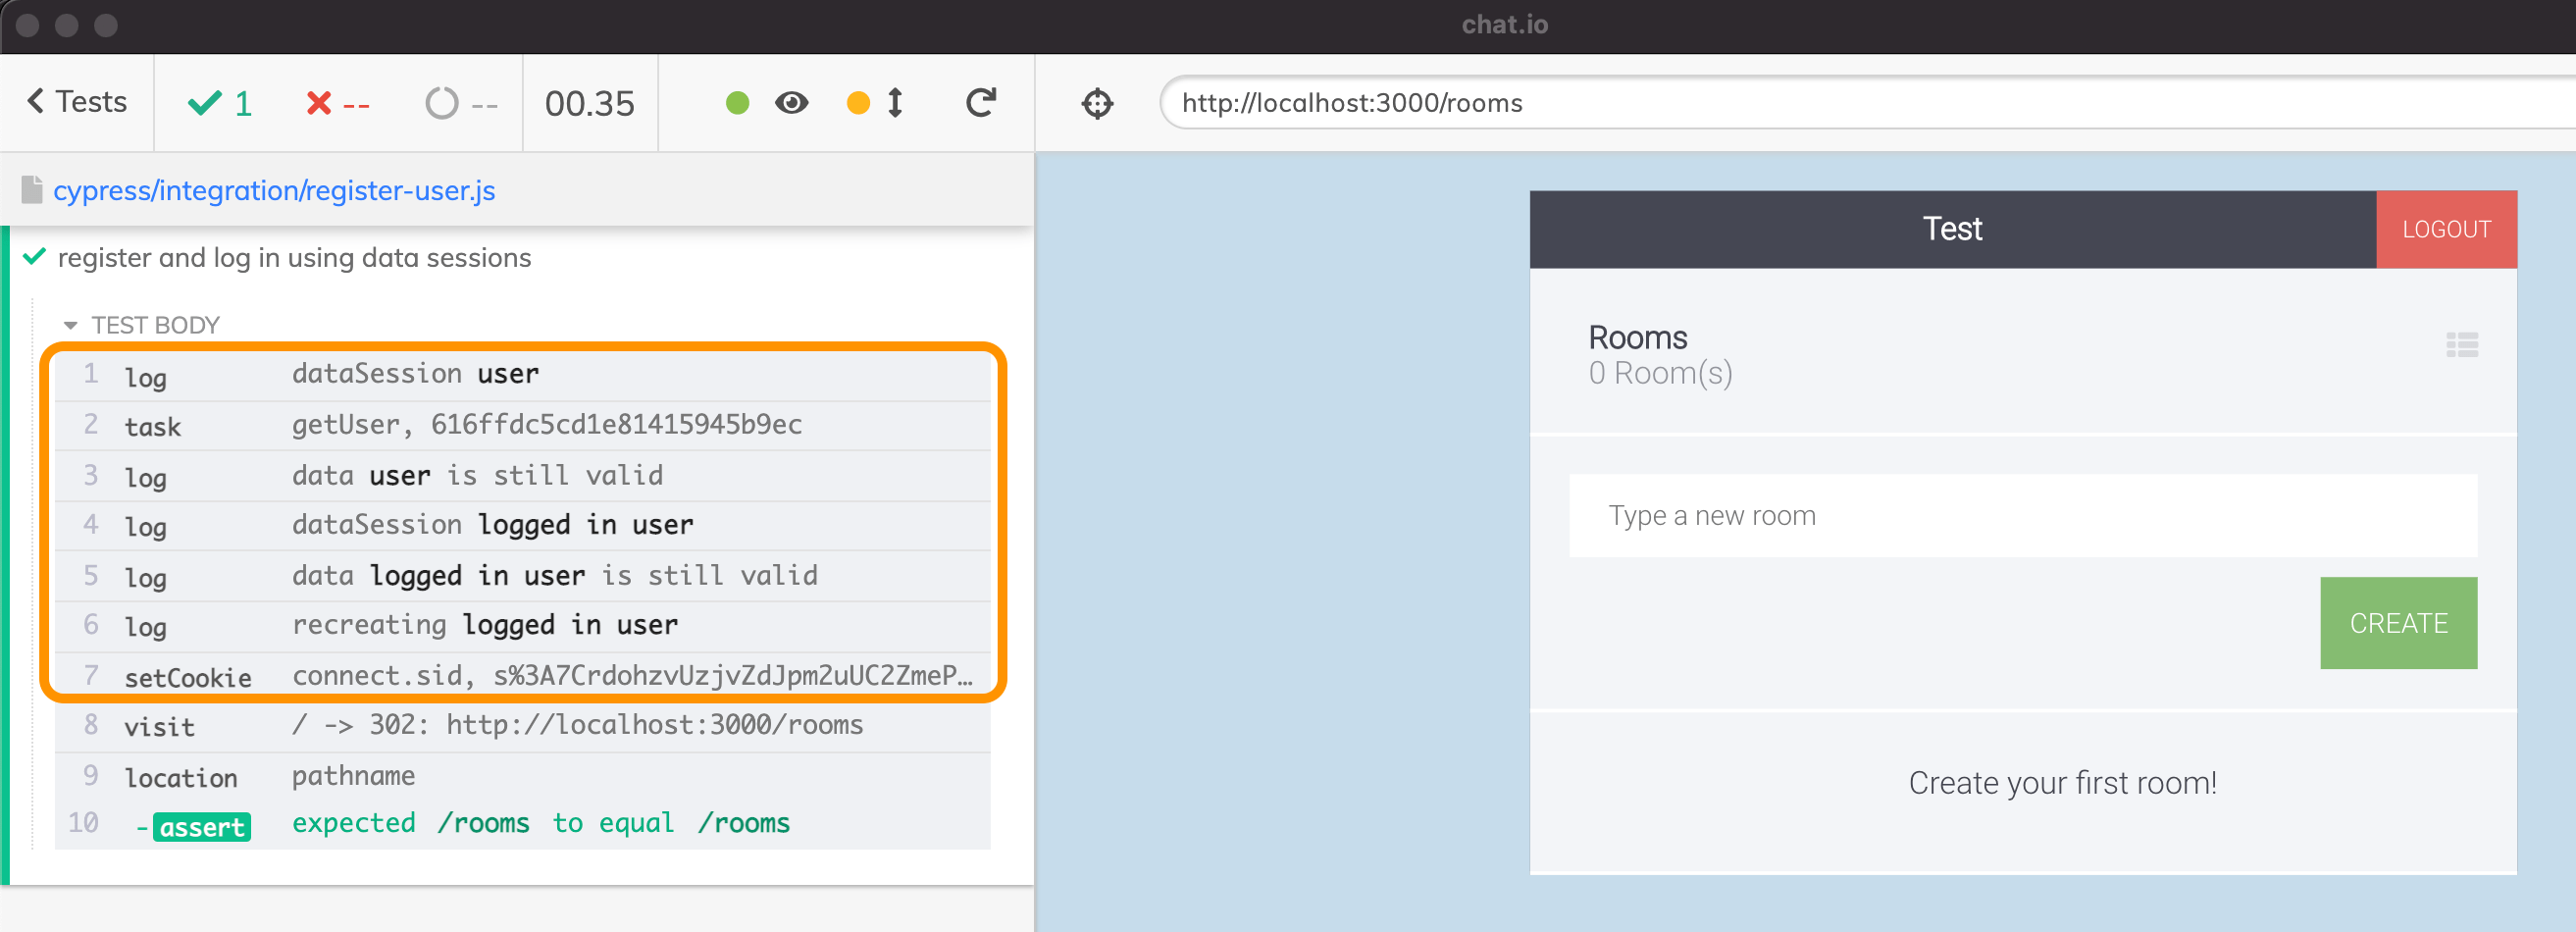 Recreate the browser session by setting the cookie from the data session